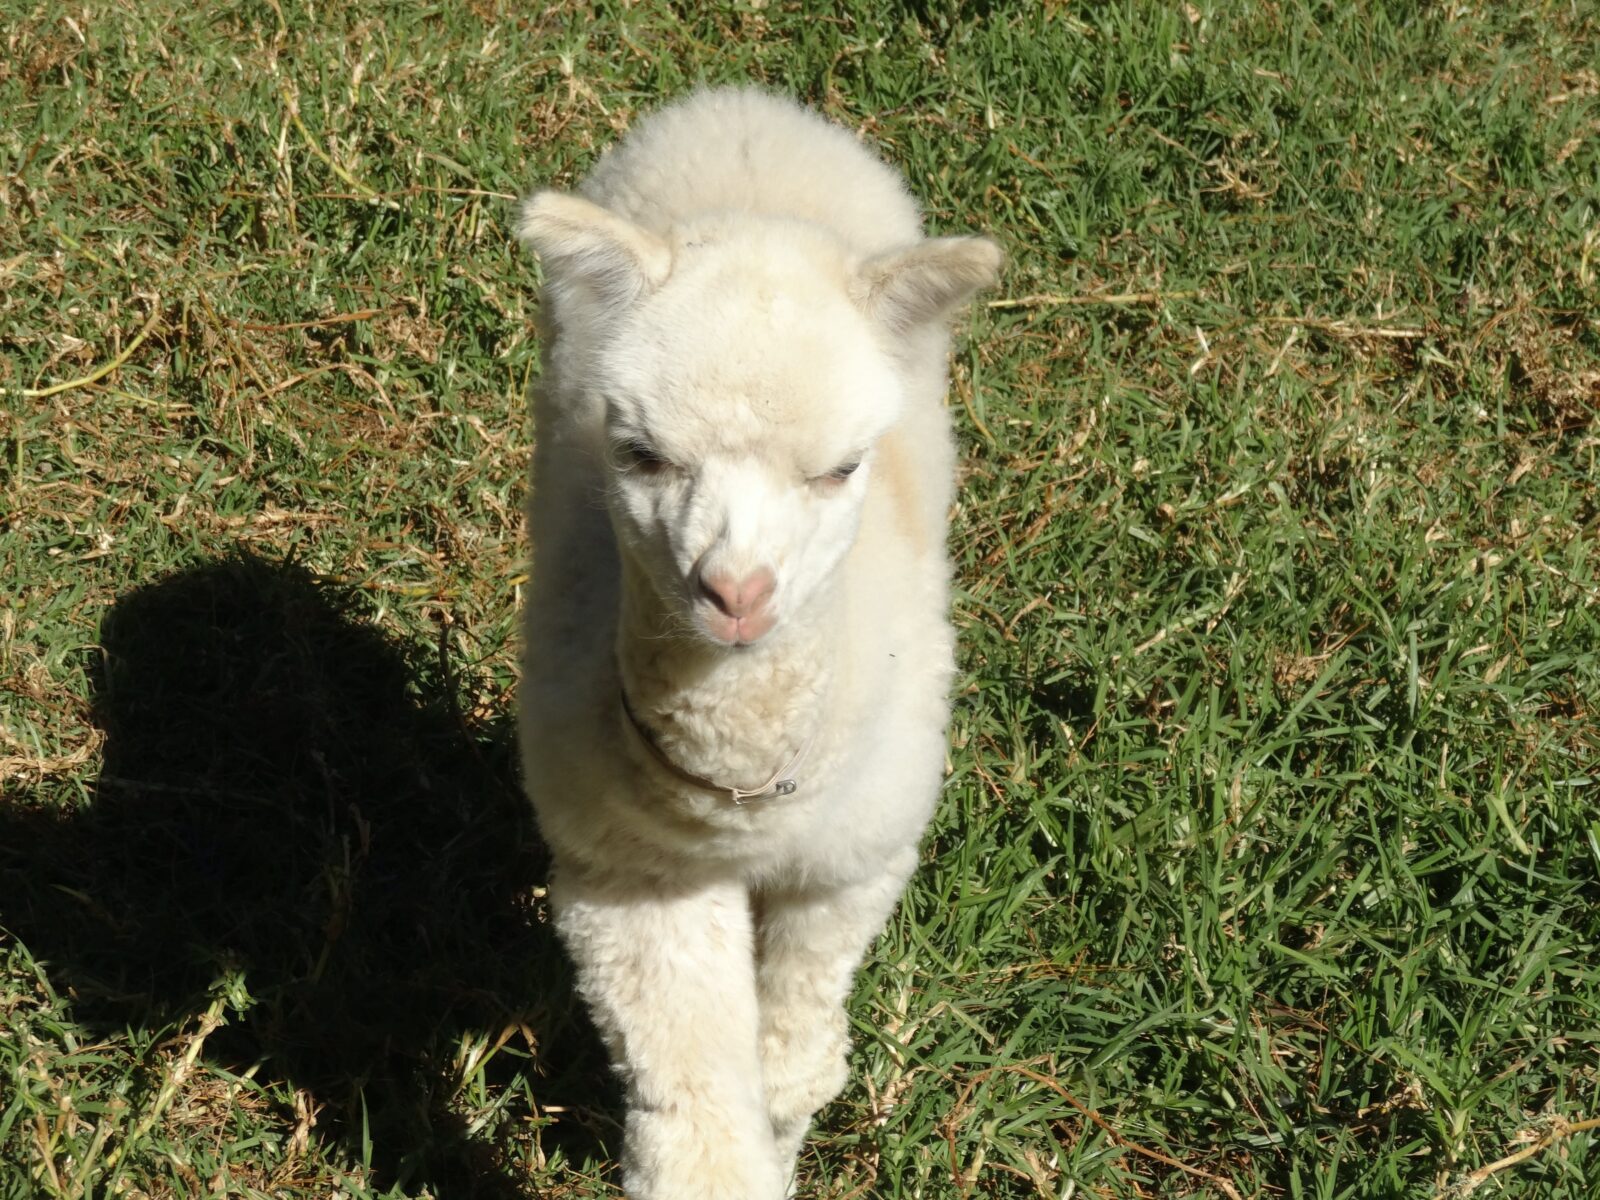 You may be lucky and find a young alpaca to photograph